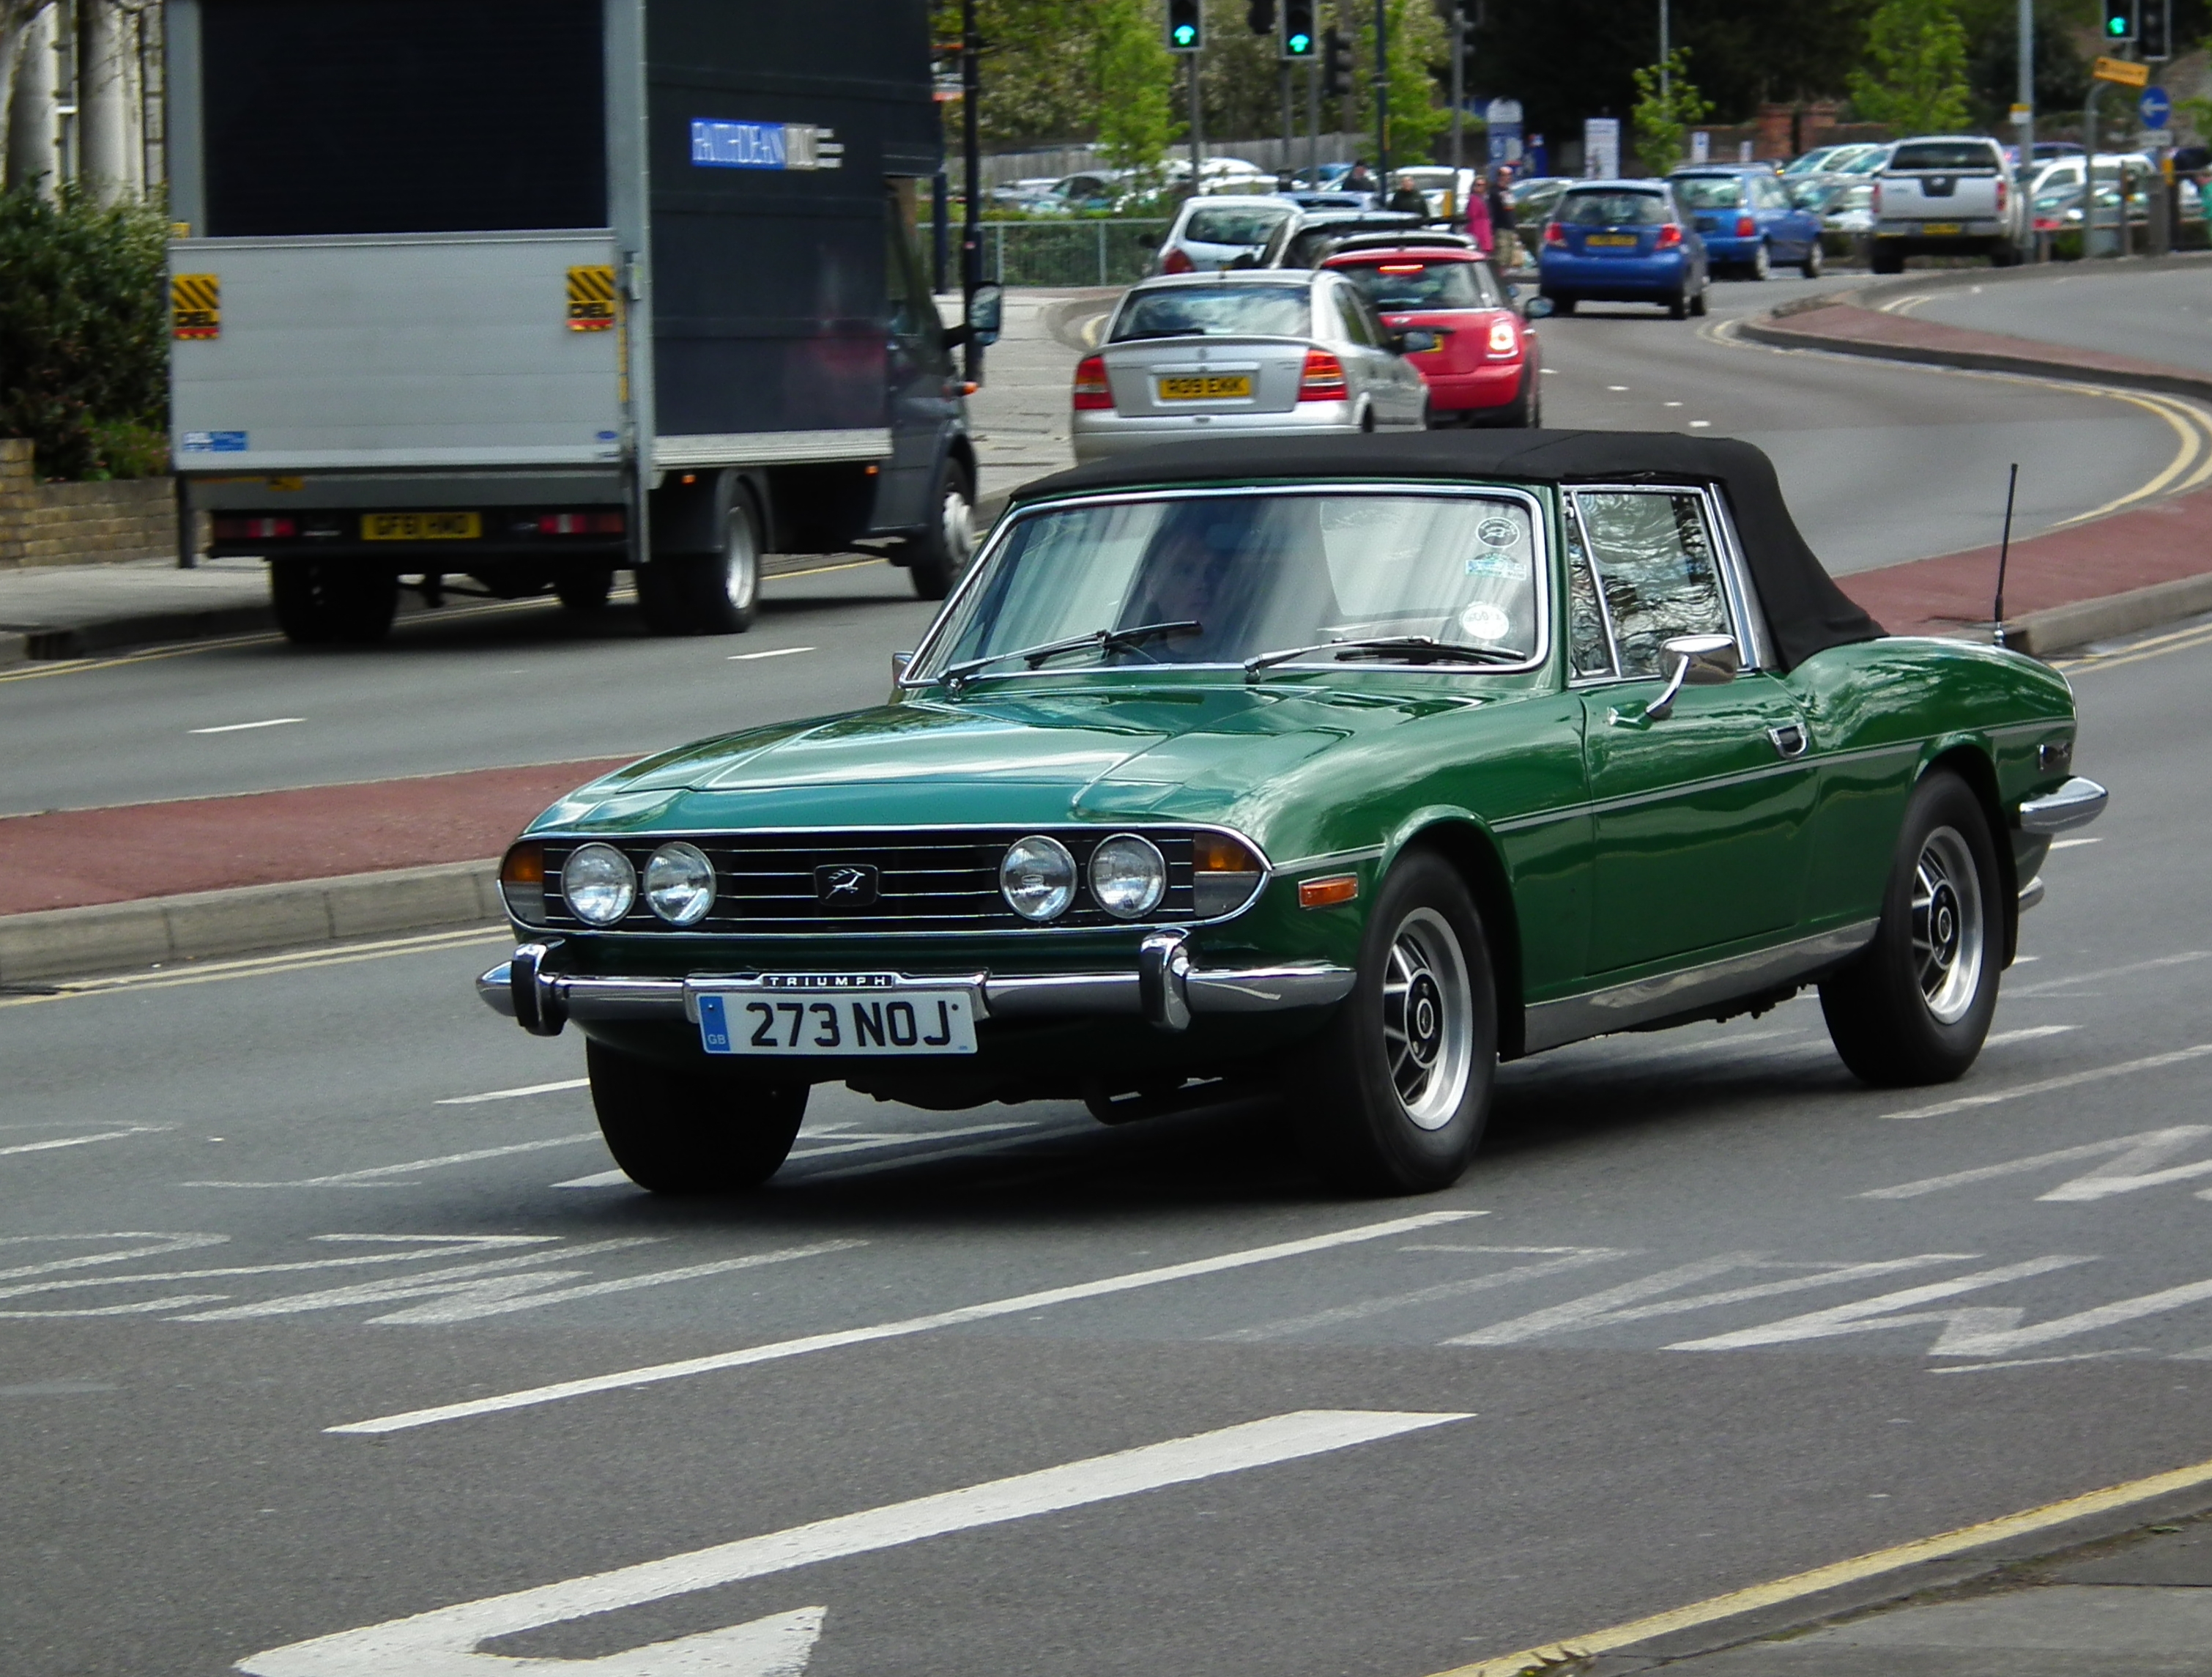 Triumph Stag | Flickr - Photo Sharing!